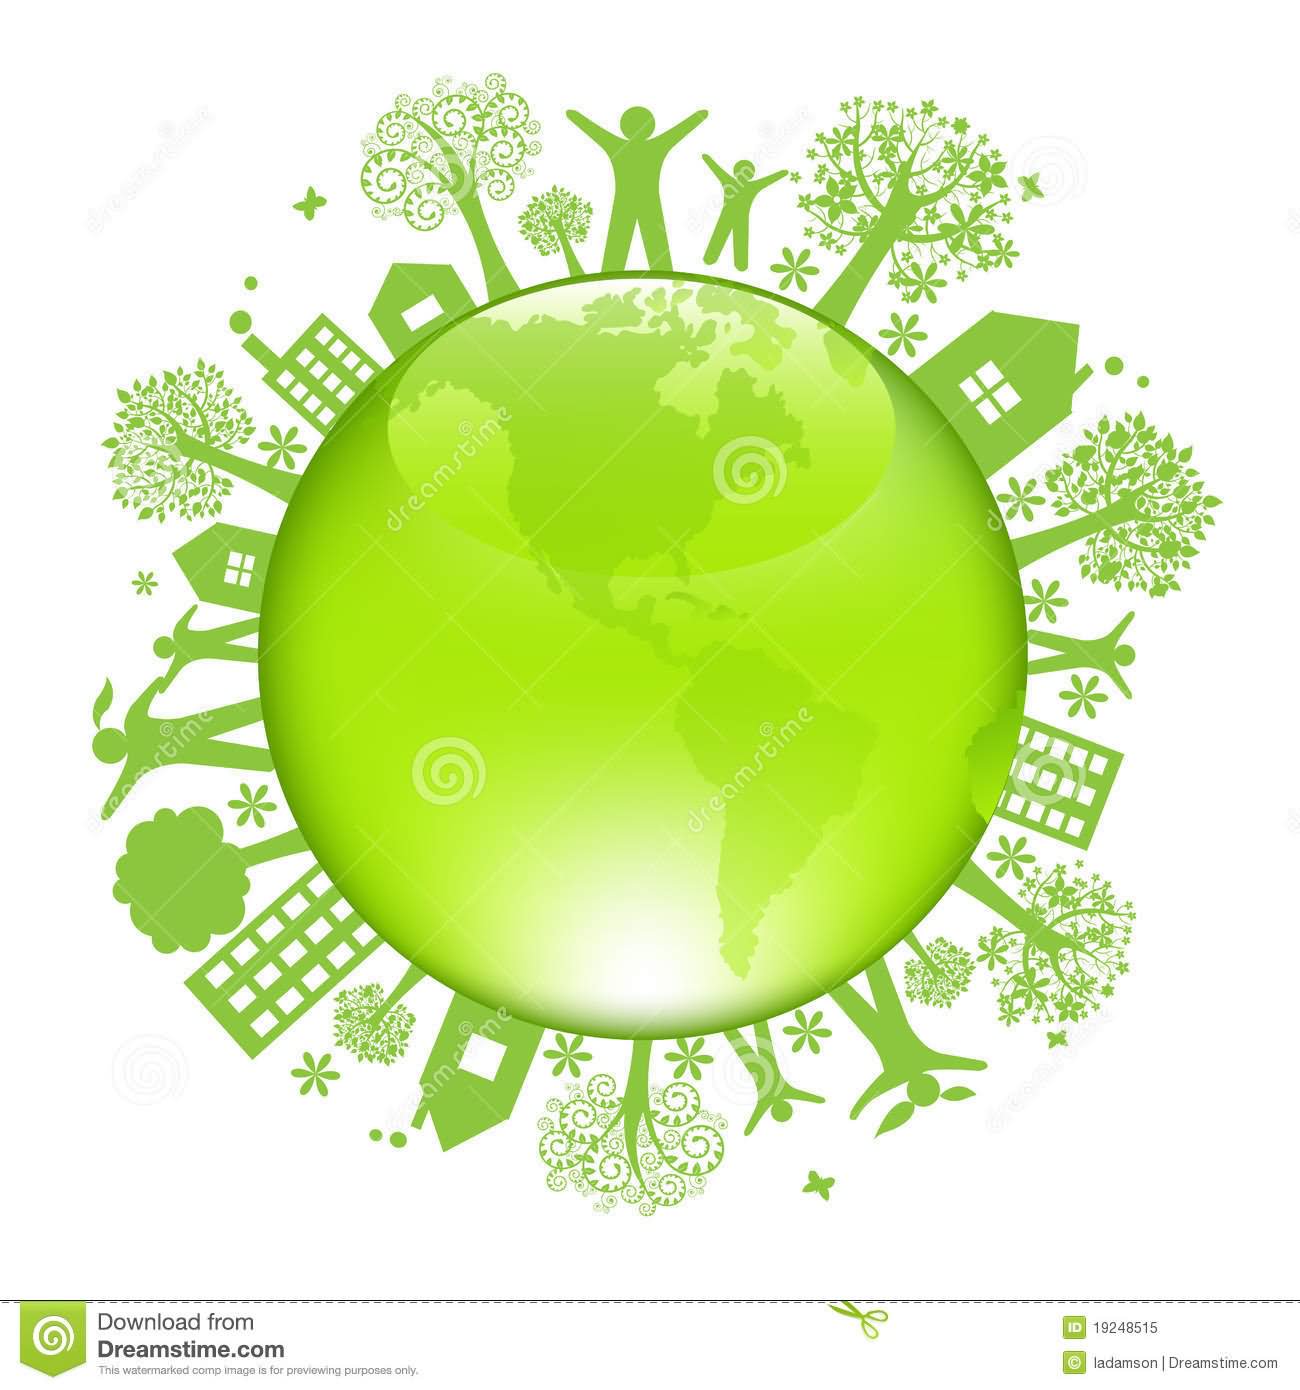 clipart picture of earth - photo #17